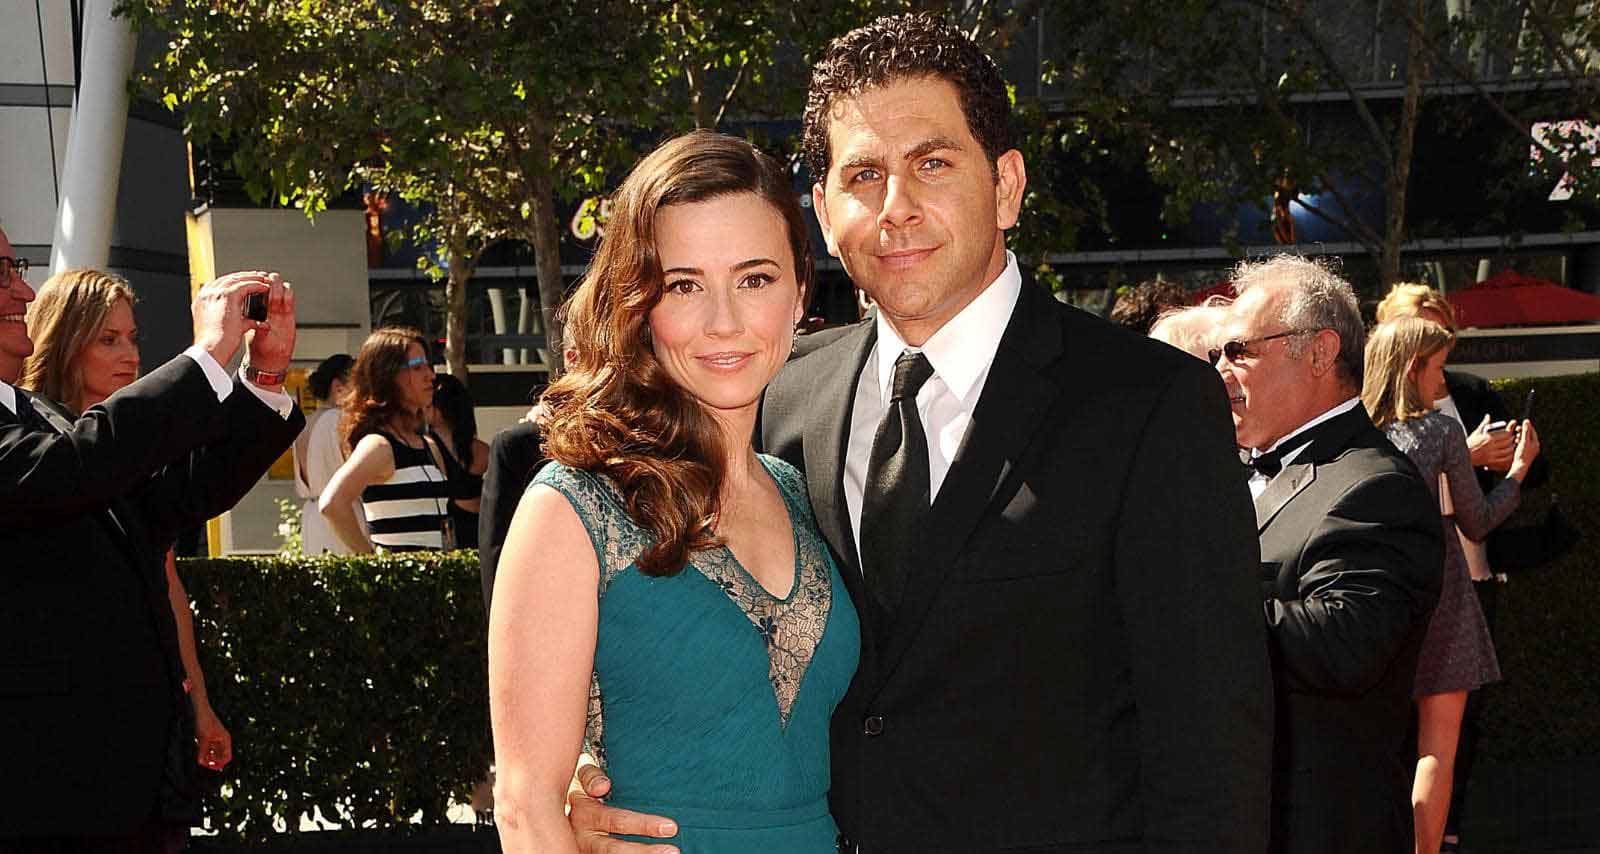 Steven Rodriguez Wiki, Age, Family, Daughter, Parents, Make up artist and Facts About Linda Cardellini’s Partner fiance